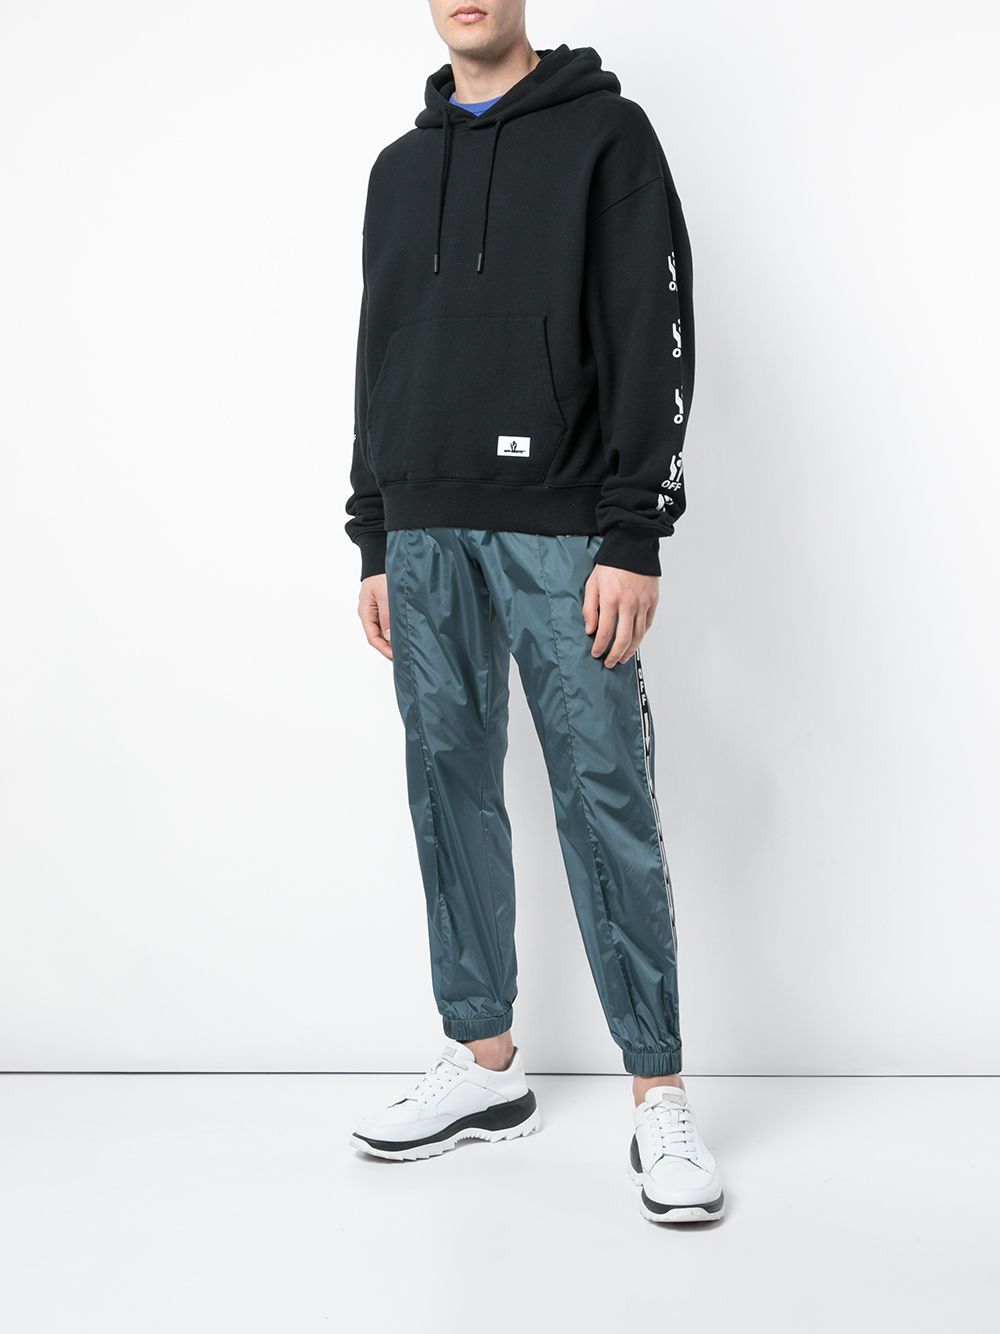 Off-White Hands Hoodie - Farfetch